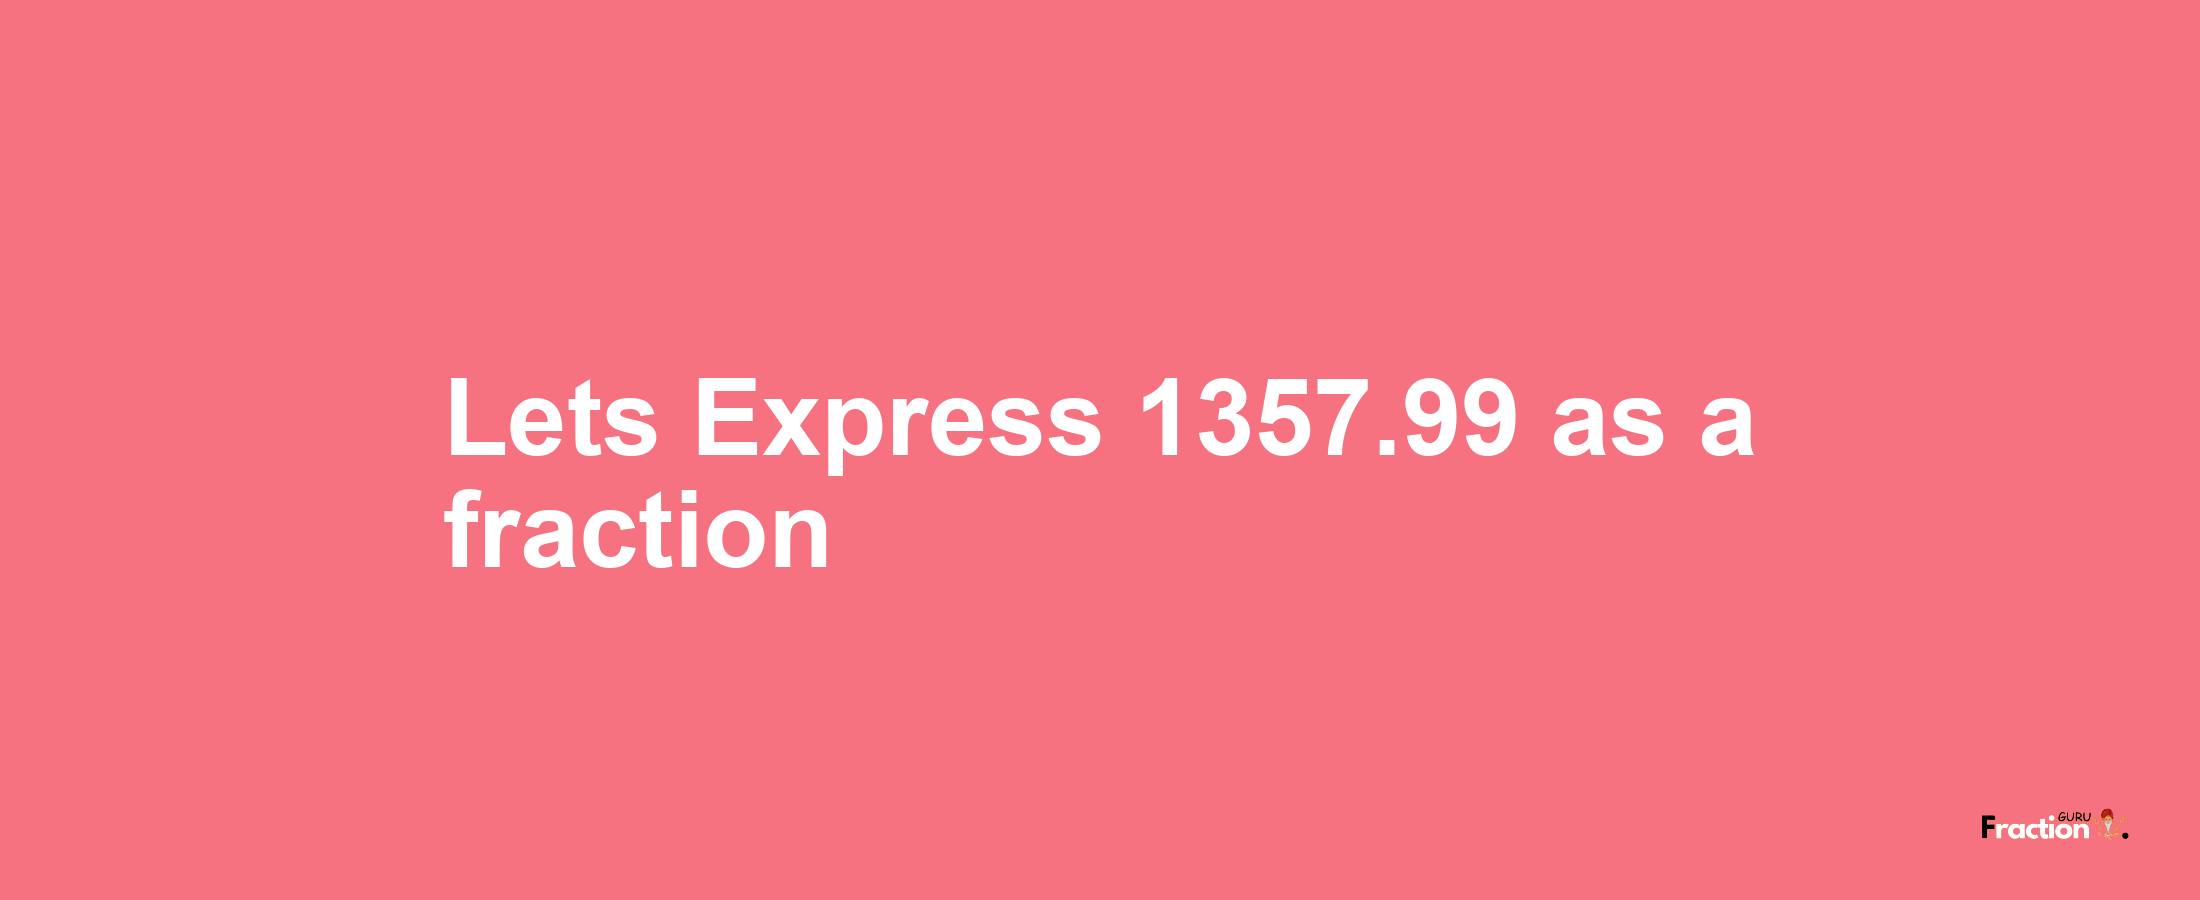 Lets Express 1357.99 as afraction